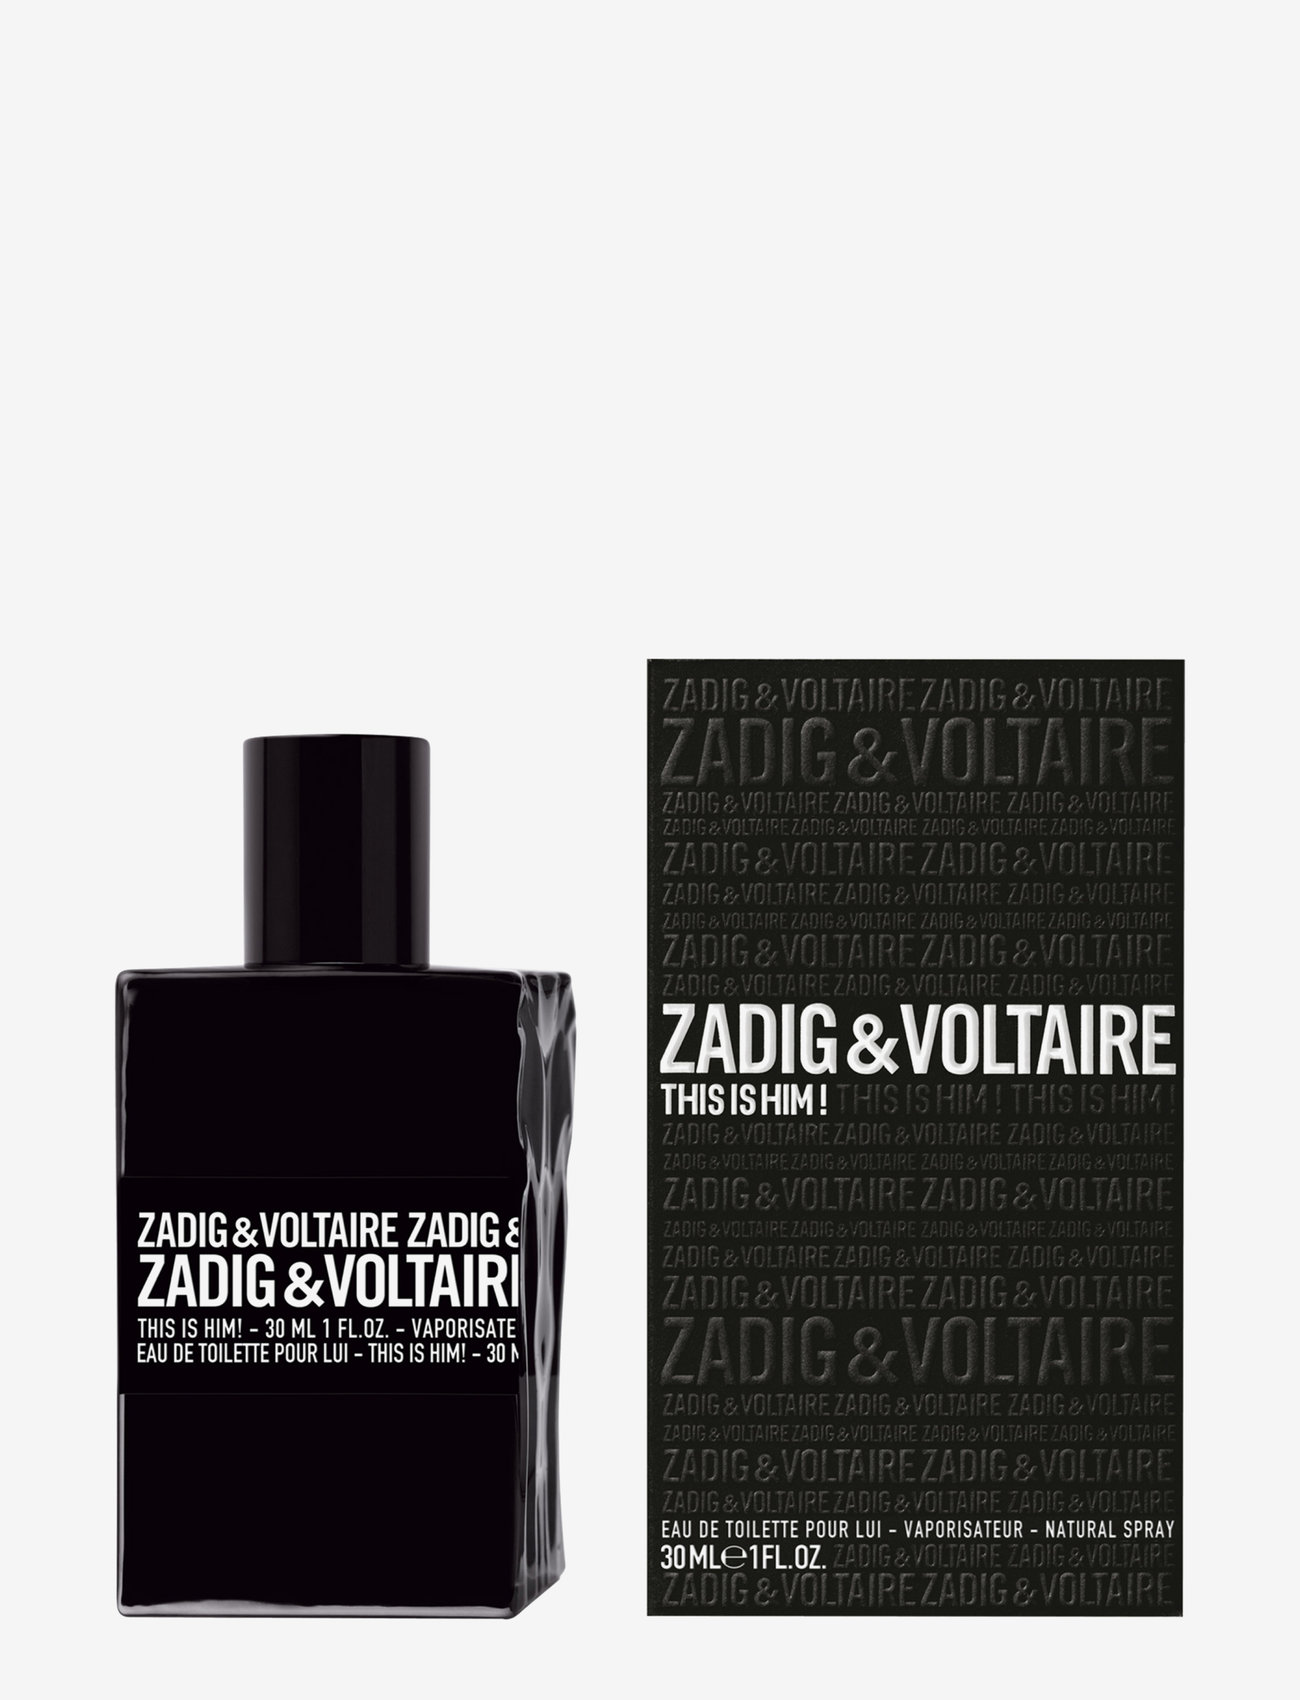 Zadig & Voltaire Fragrance - This is Him! EdT 30 ml - mellan 500-1000 kr - no color - 1